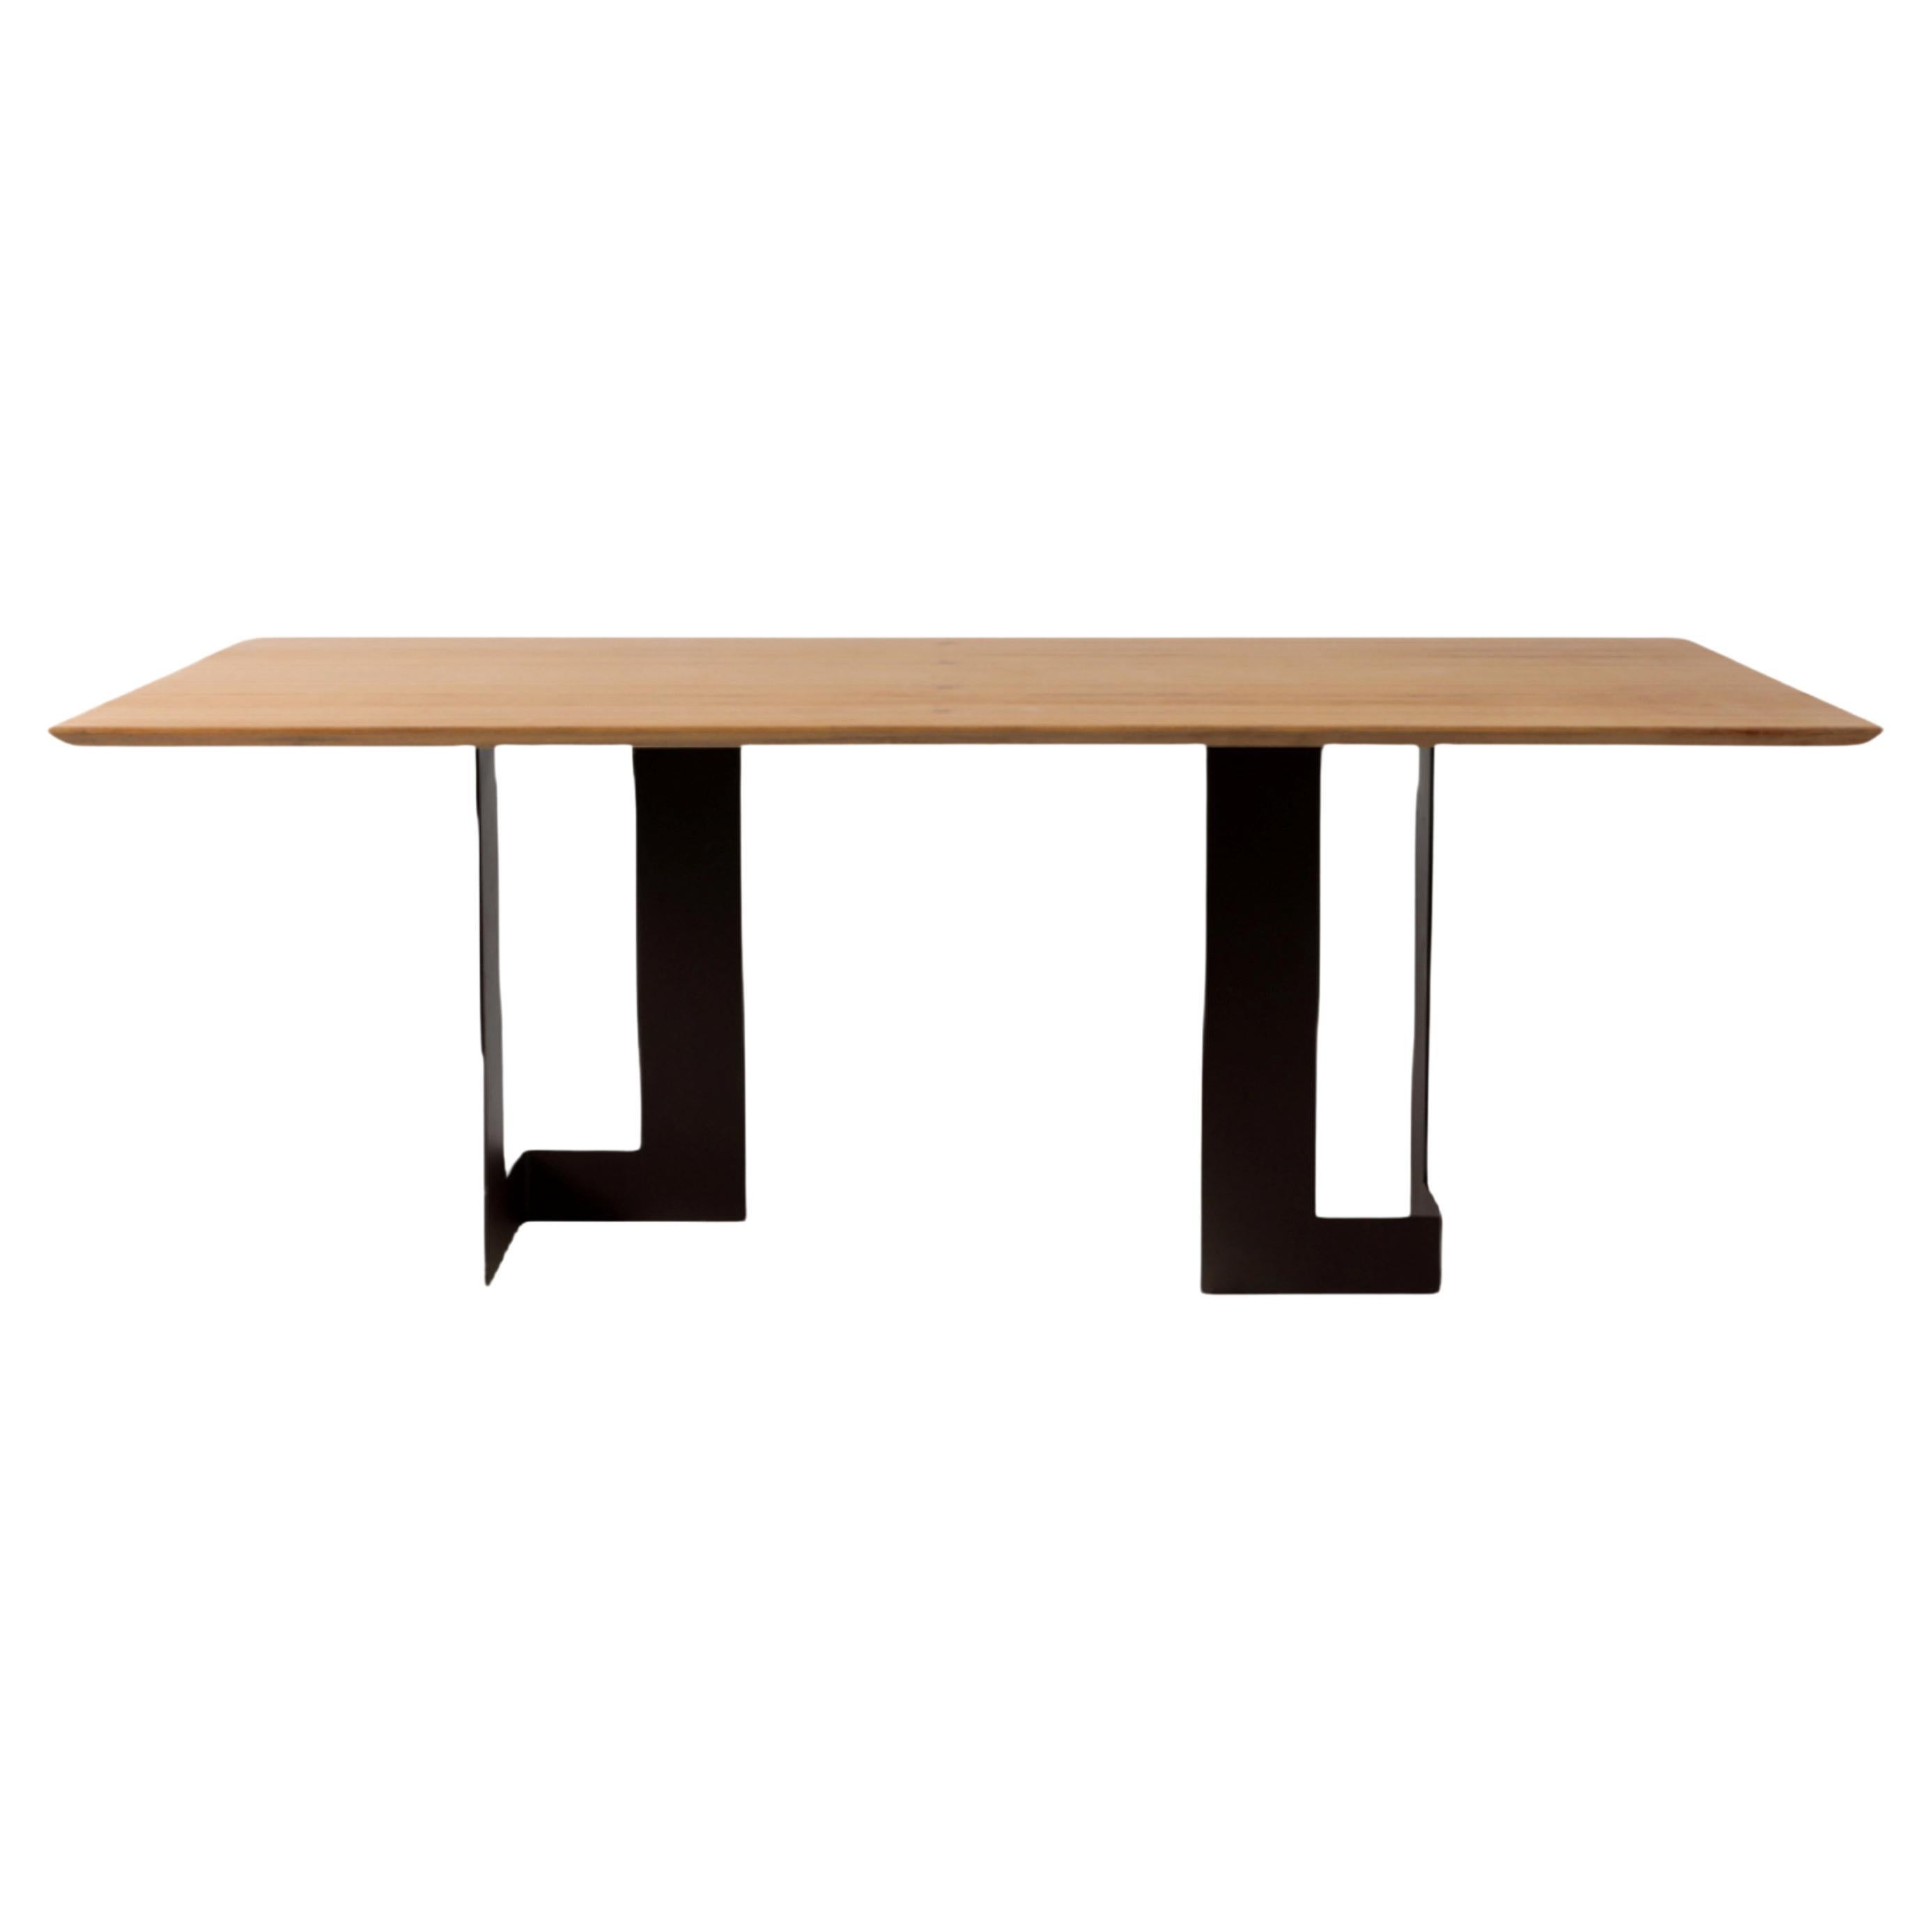 Minimalist-style "Planos" dining table in solid wood and painted steel For Sale